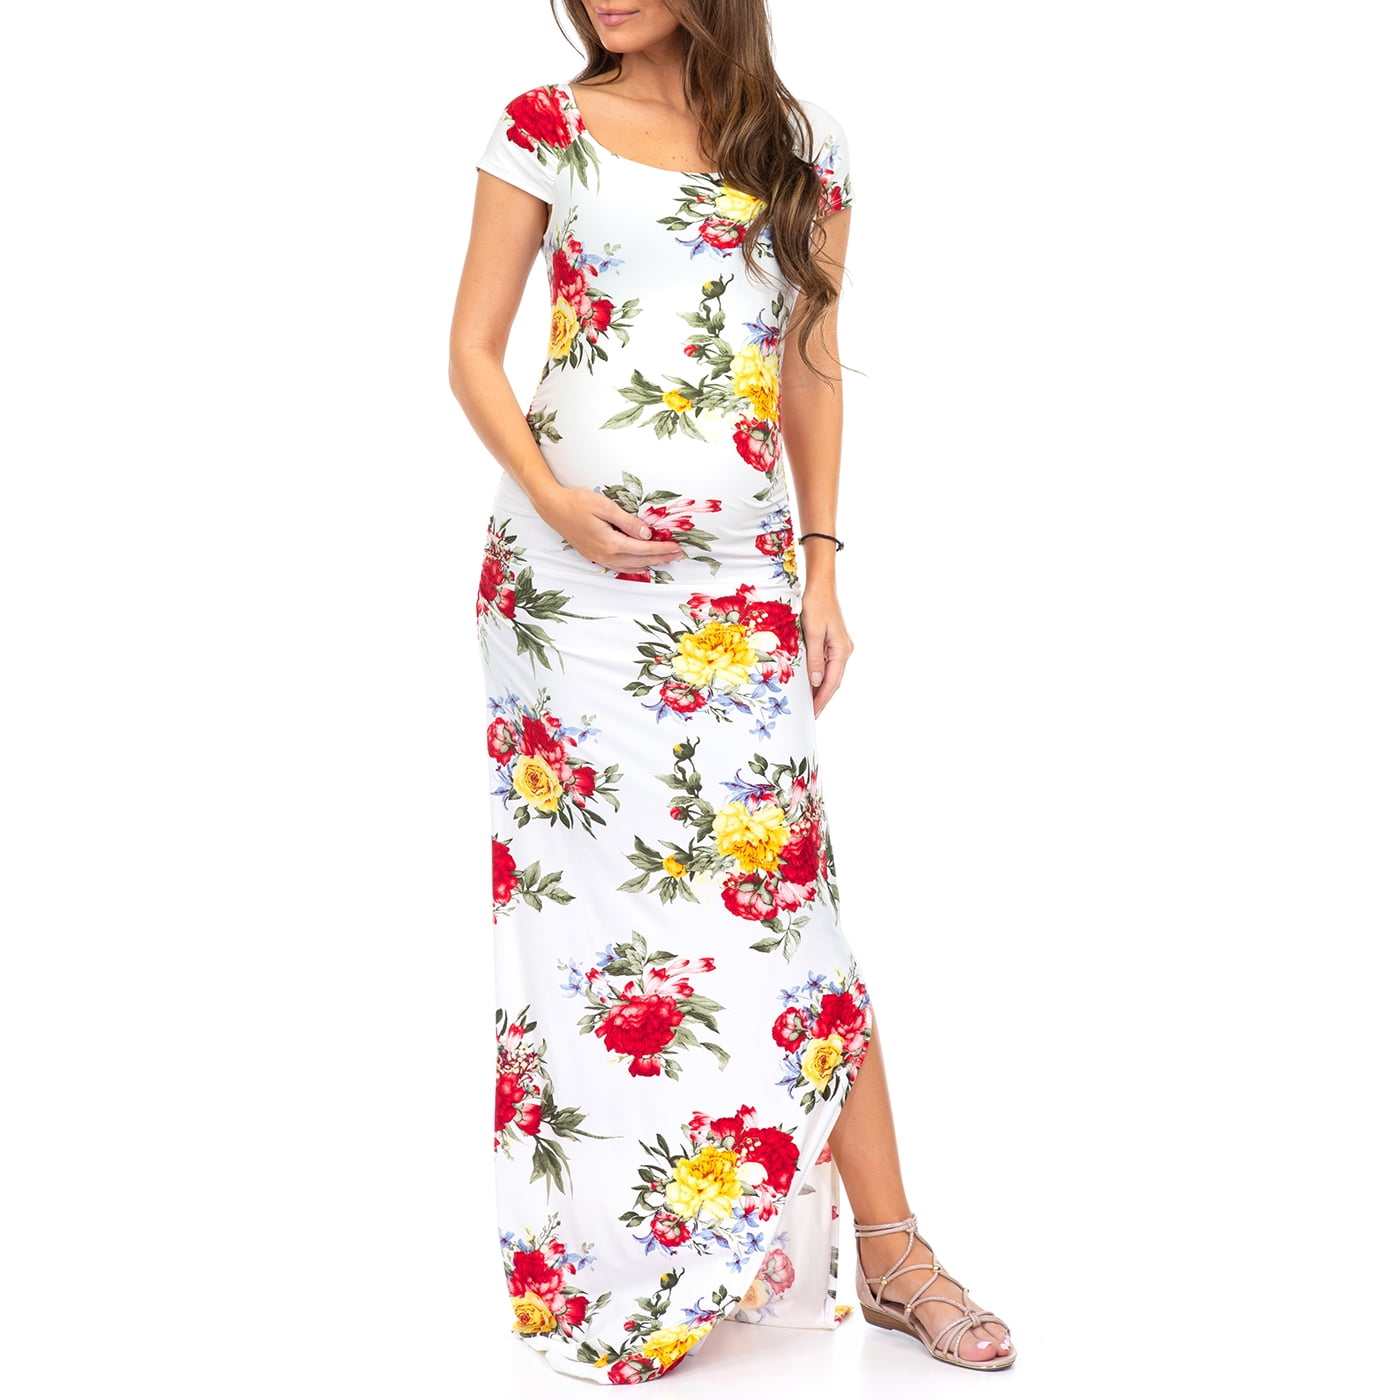 Mother Bee Maternity Ruched Bodycon Maternity Dress for Baby Shower or Casual Wear Made in USA 